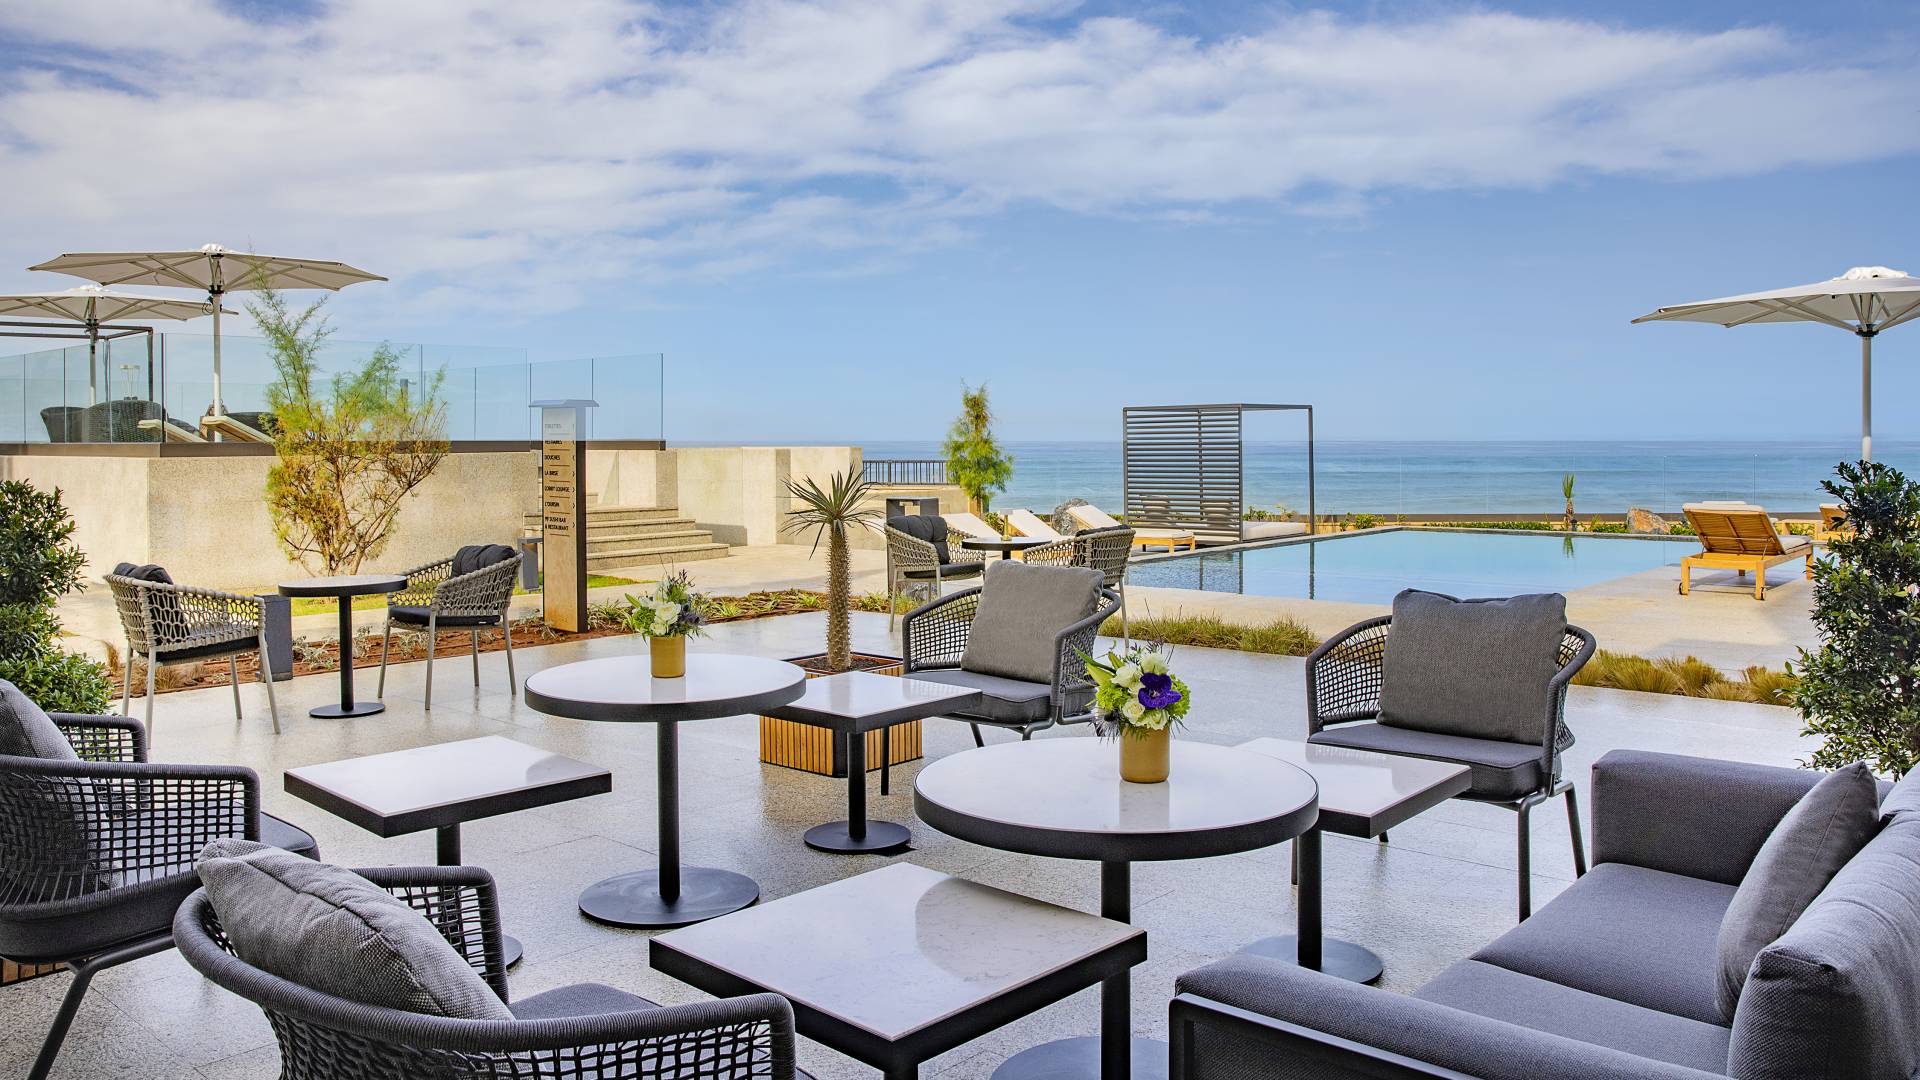 Outdoor Terrace at a Restaurant with Ocean View